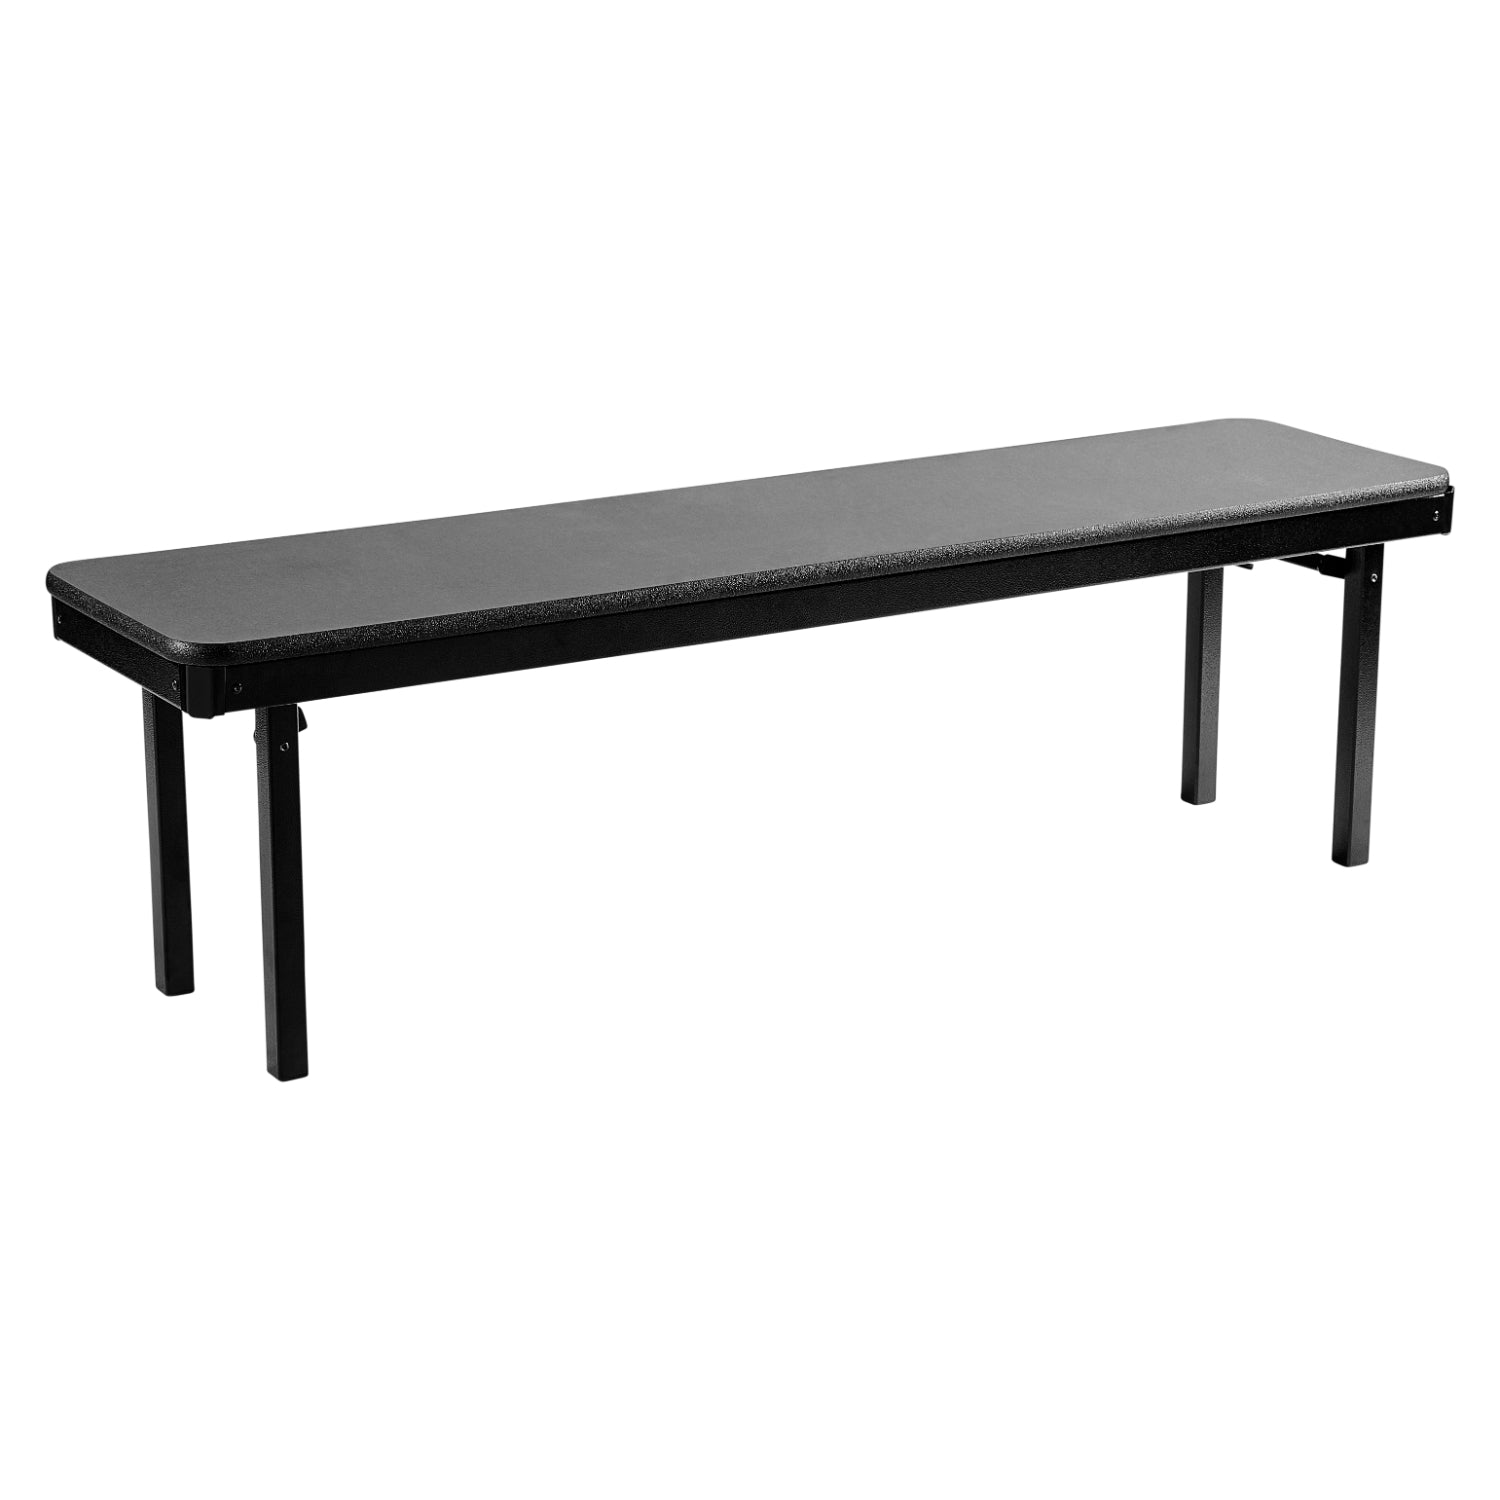 Max Seating Folding Bench, 15" x 96", MDF Core, High Pressure Laminate Top with ProtectEdge